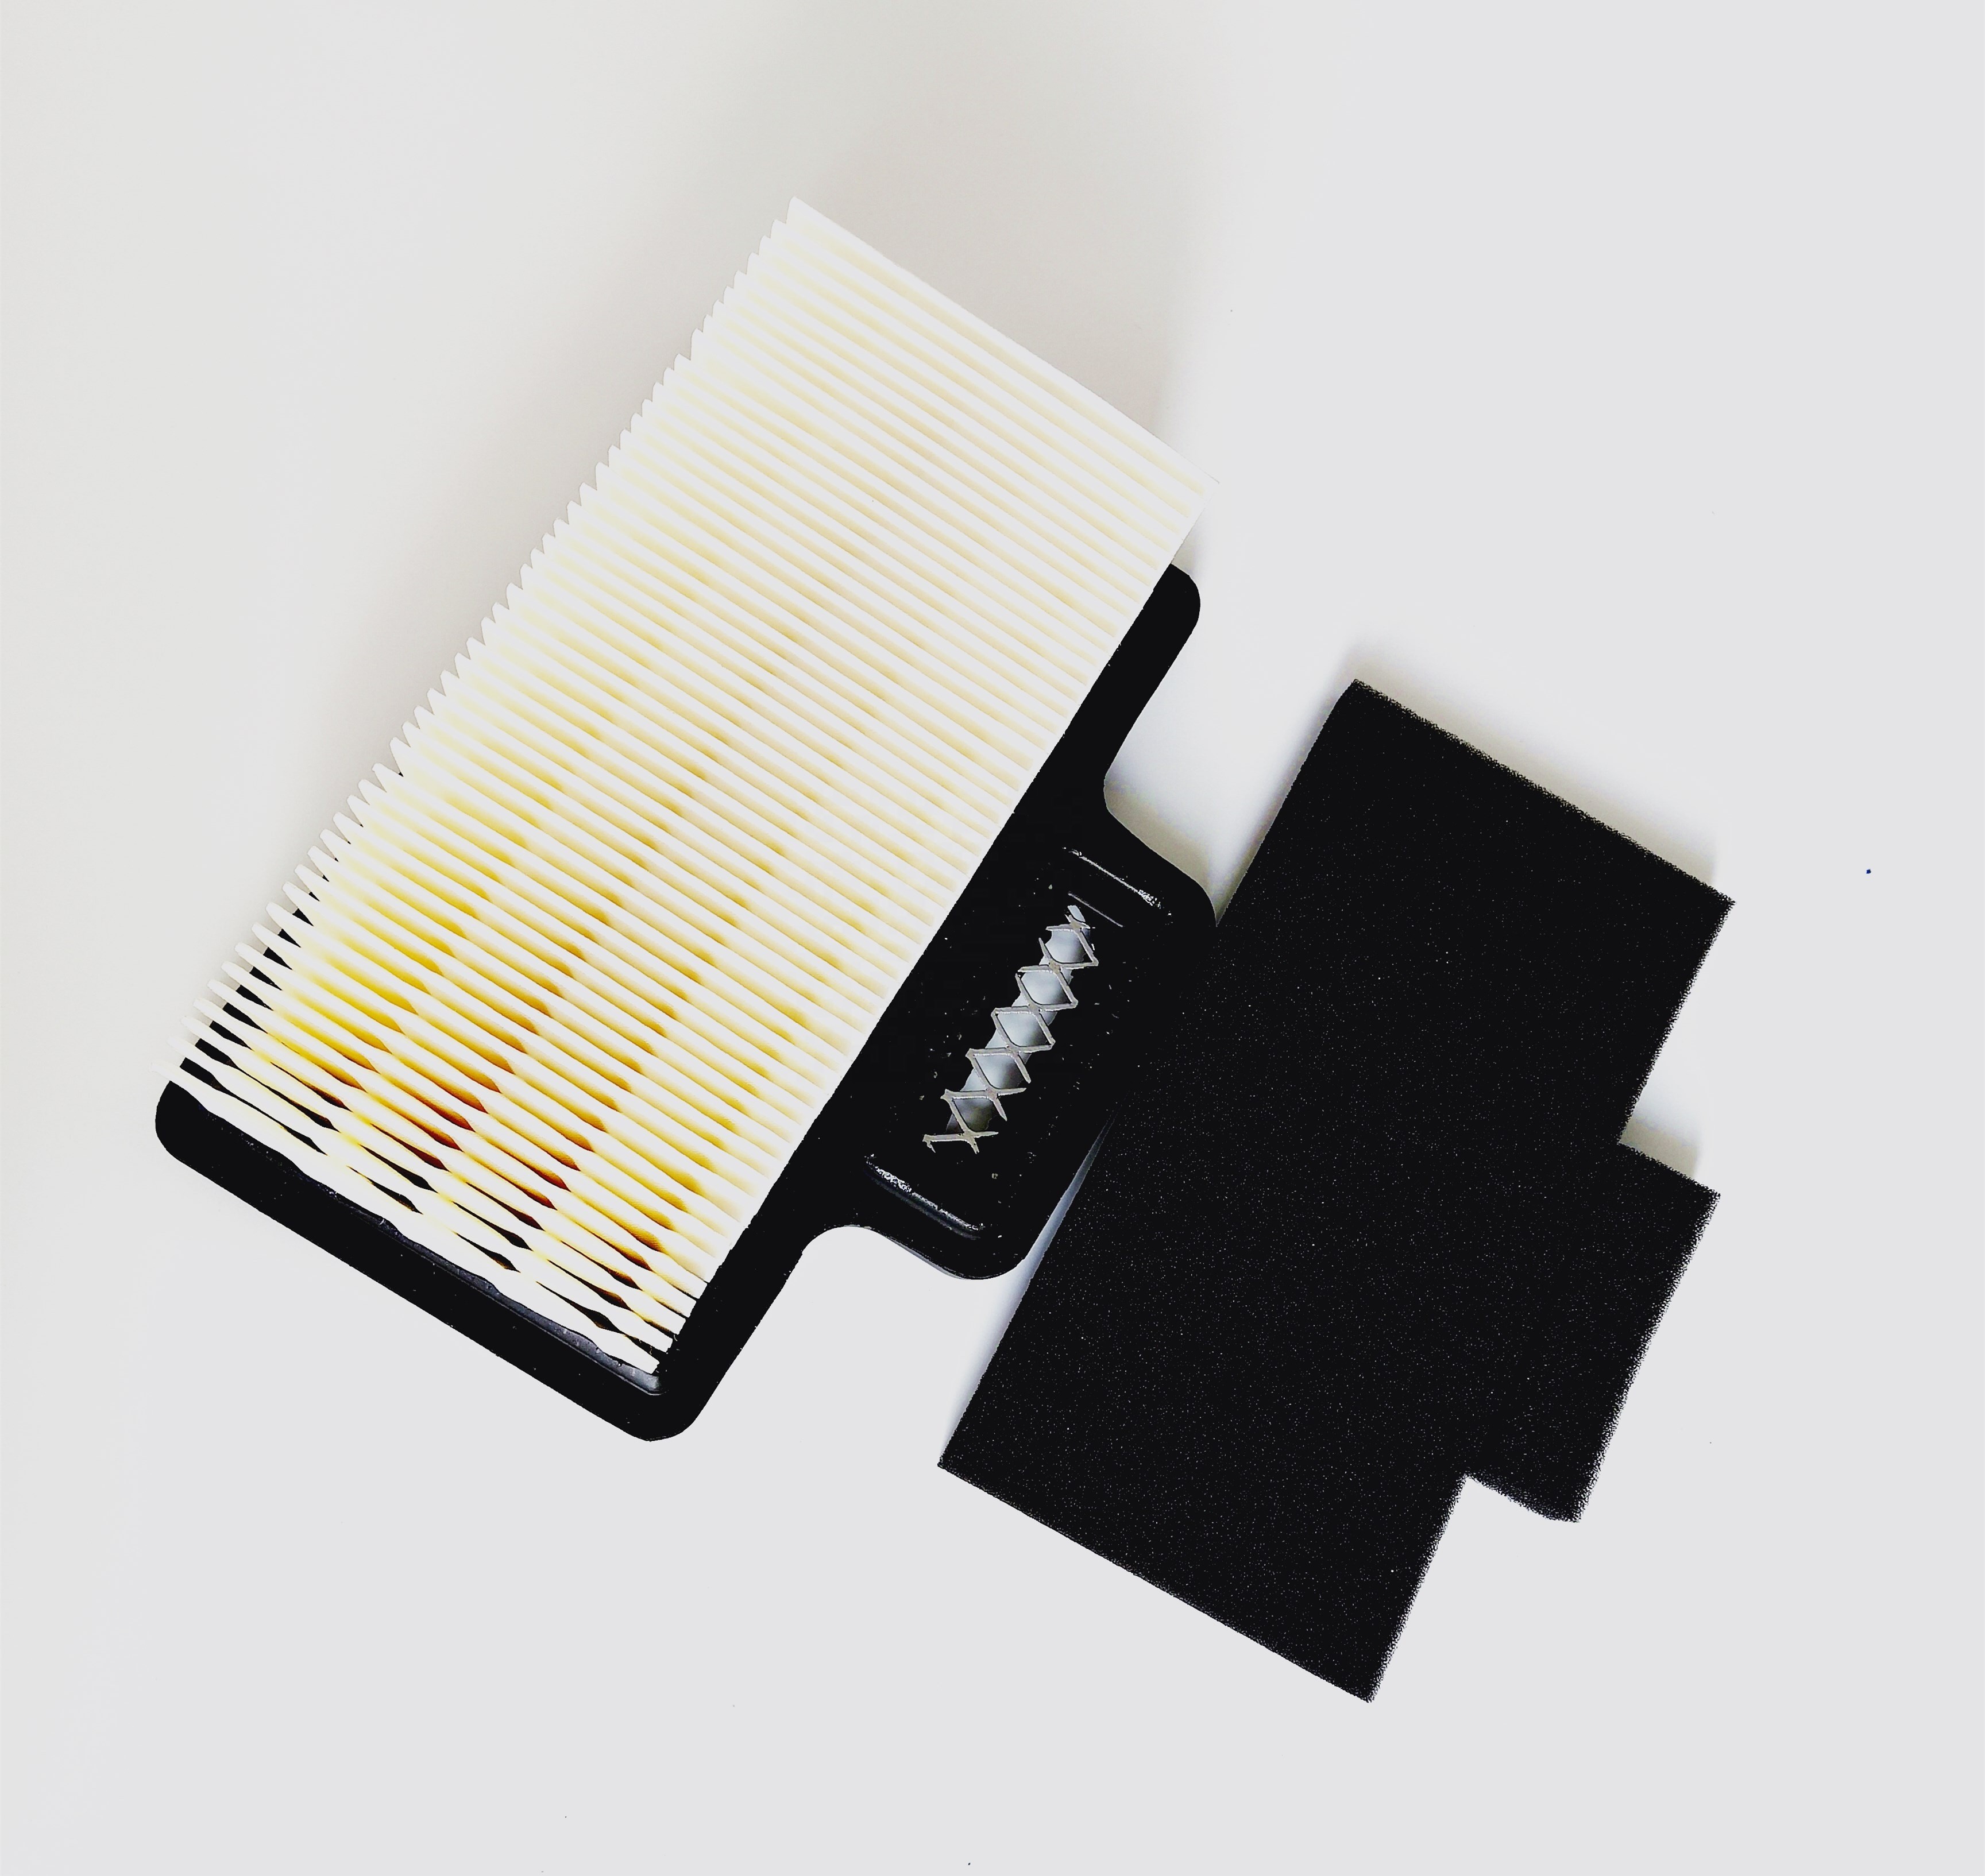 Air Filter 5200003062 for BS50-4AS BS60-4AS BS70-4AS with sponge pre-filter  Lawn mower air filter